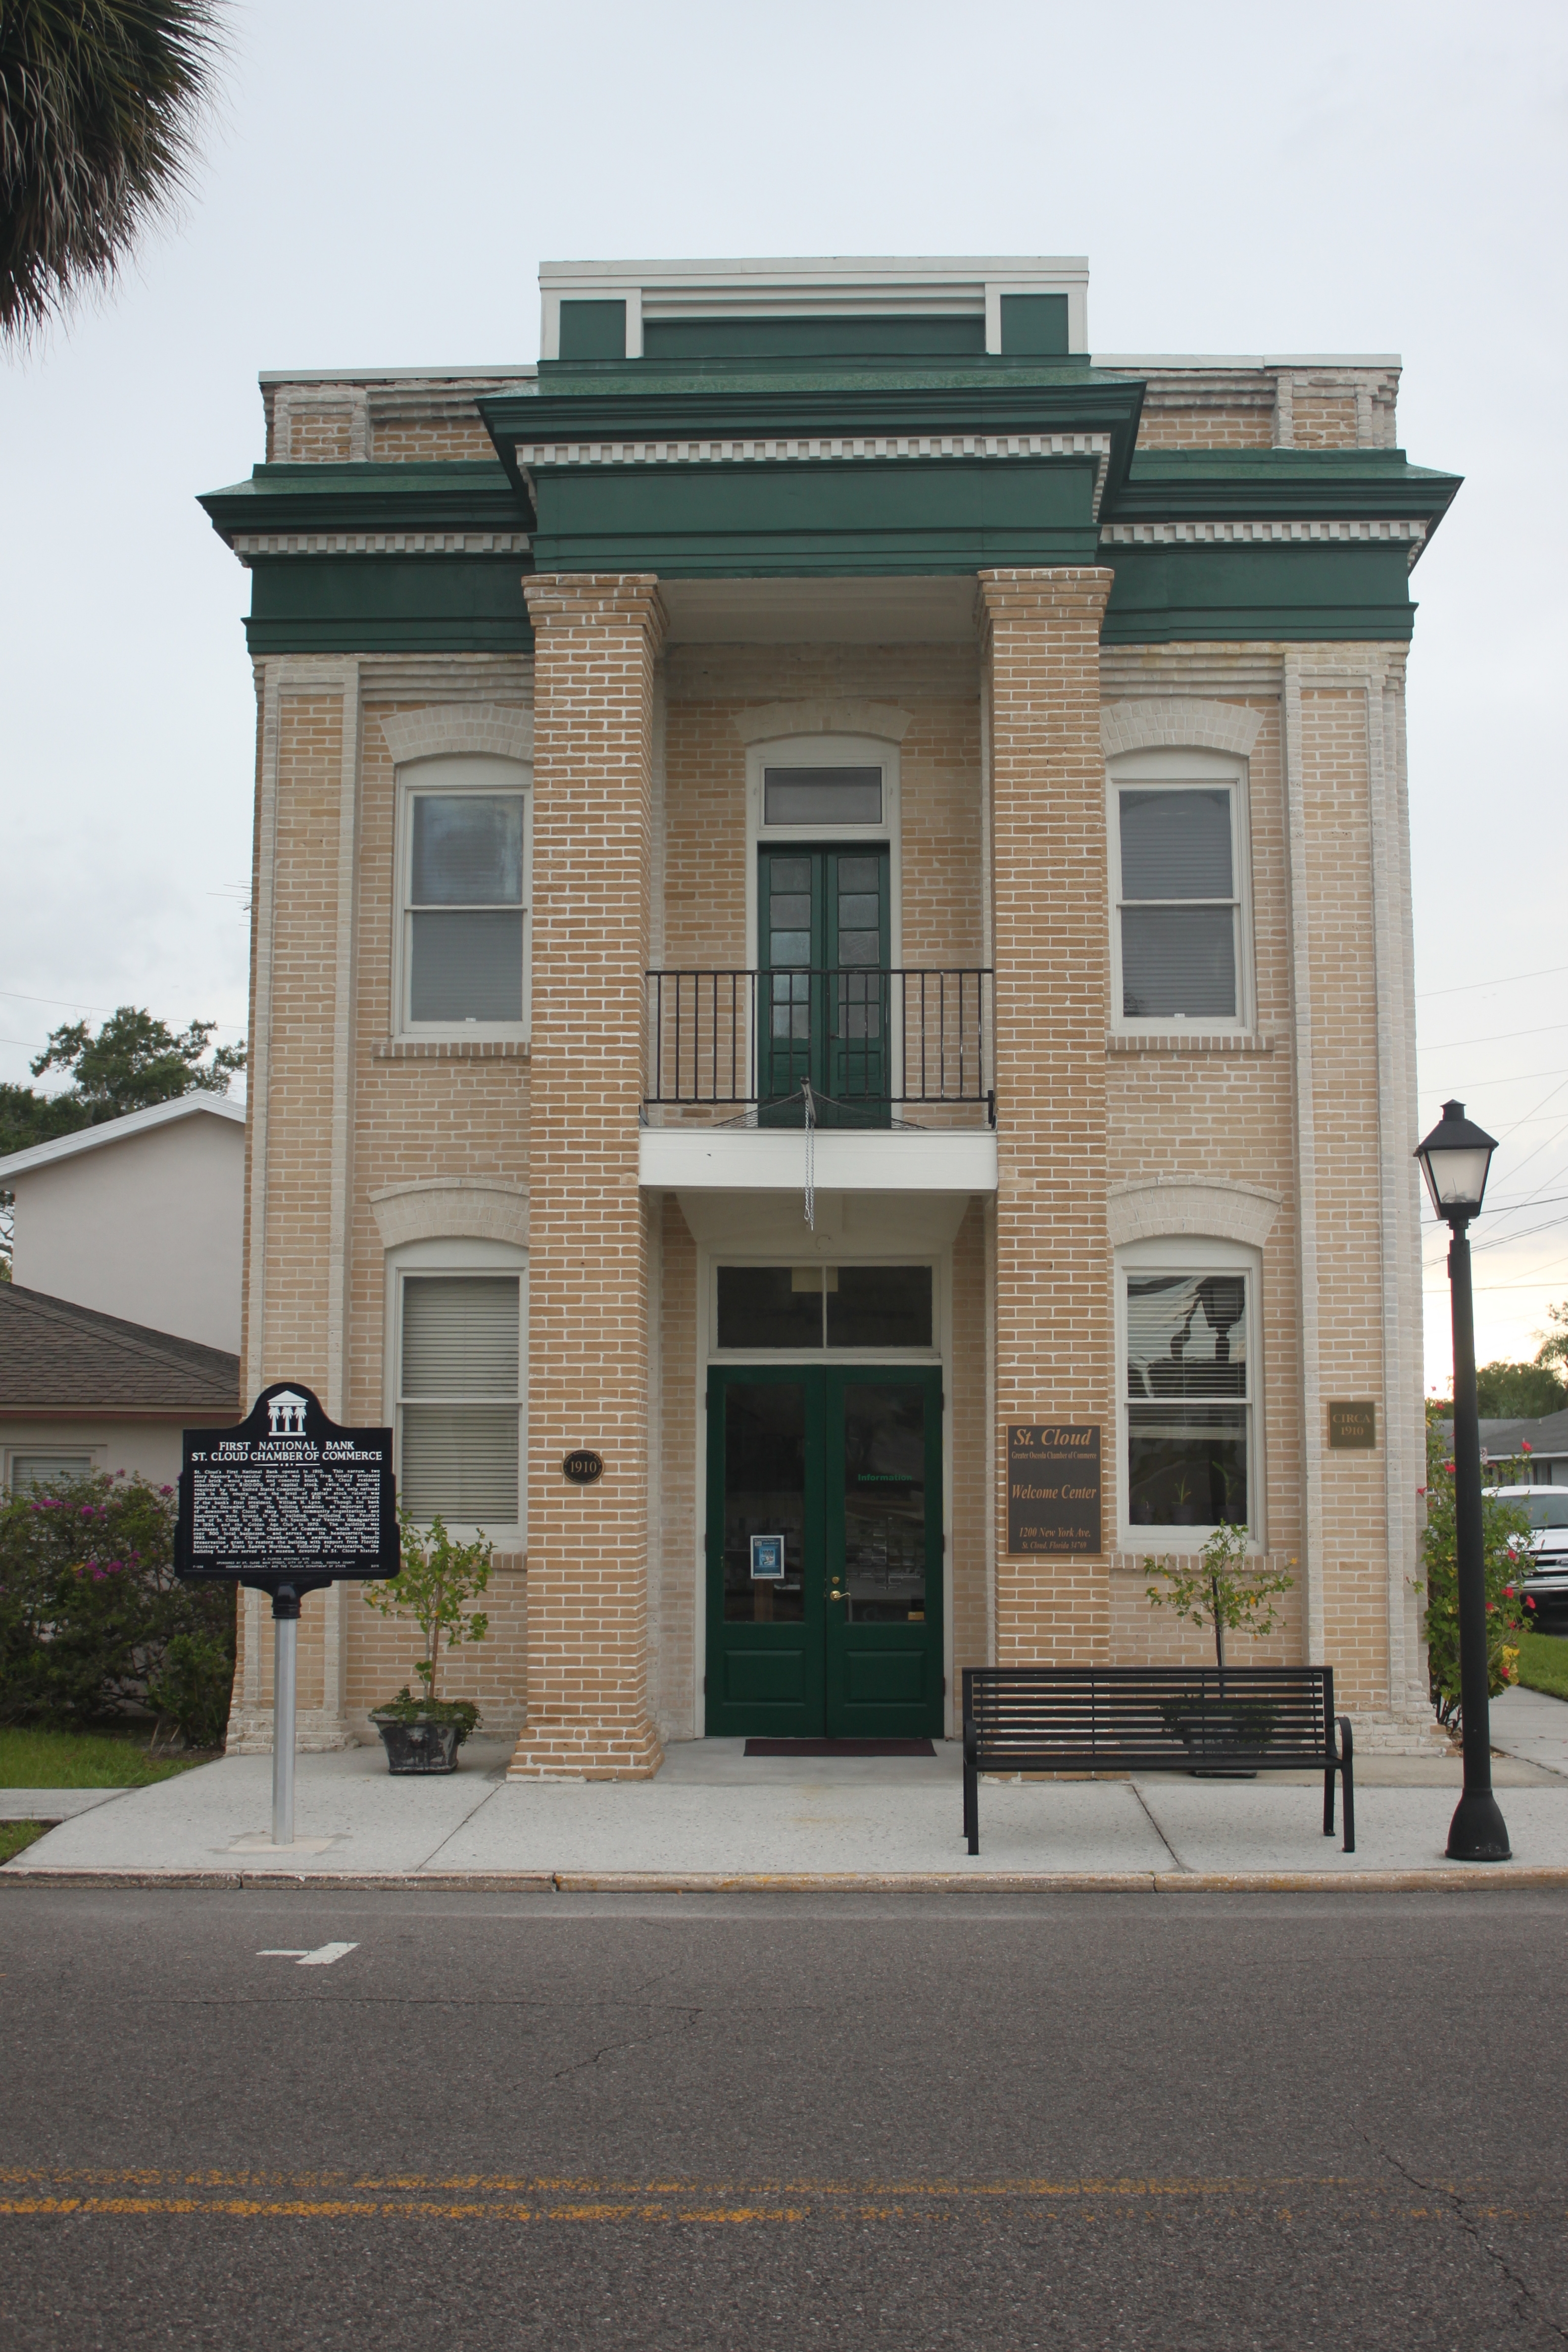 First National Bank/St. Cloud Chamber of Commerce Marker and building